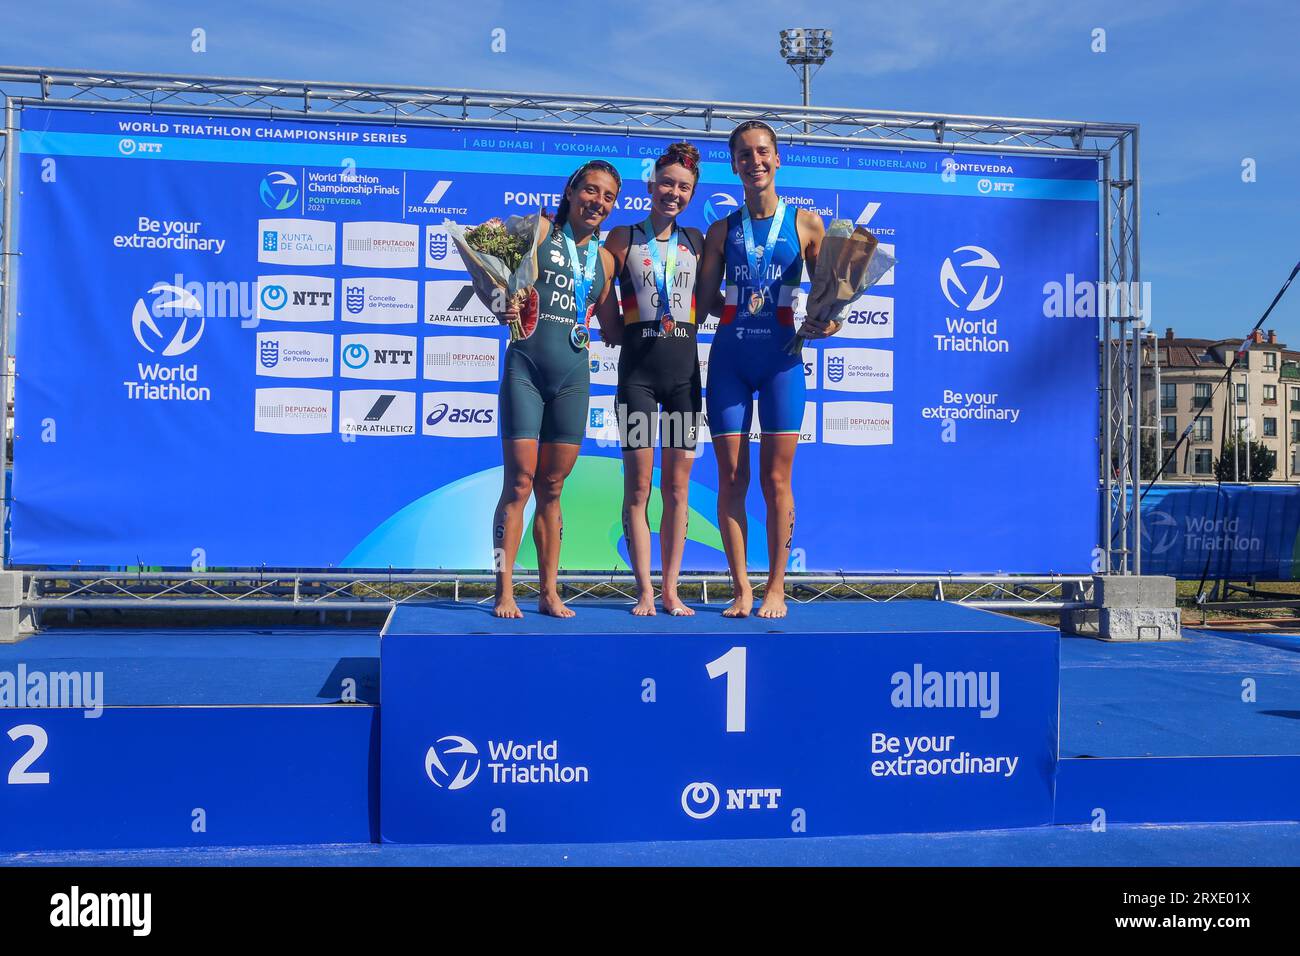 Pontevedra, Spain. 24th Sep, 2023. The final podium of the World Championship with the German triathlete, Selina Klamt, the Portuguese triathlete, Maria Tomé (L) and the Italian triathlete, Angelica Prestia (R) during the Triathlon World Championships 2023 Women's Sub23, on September 24, 2023, in Pontevedra, Spain. (Photo by Alberto Brevers/Pacific Press) Credit: Pacific Press Media Production Corp./Alamy Live News Stock Photo